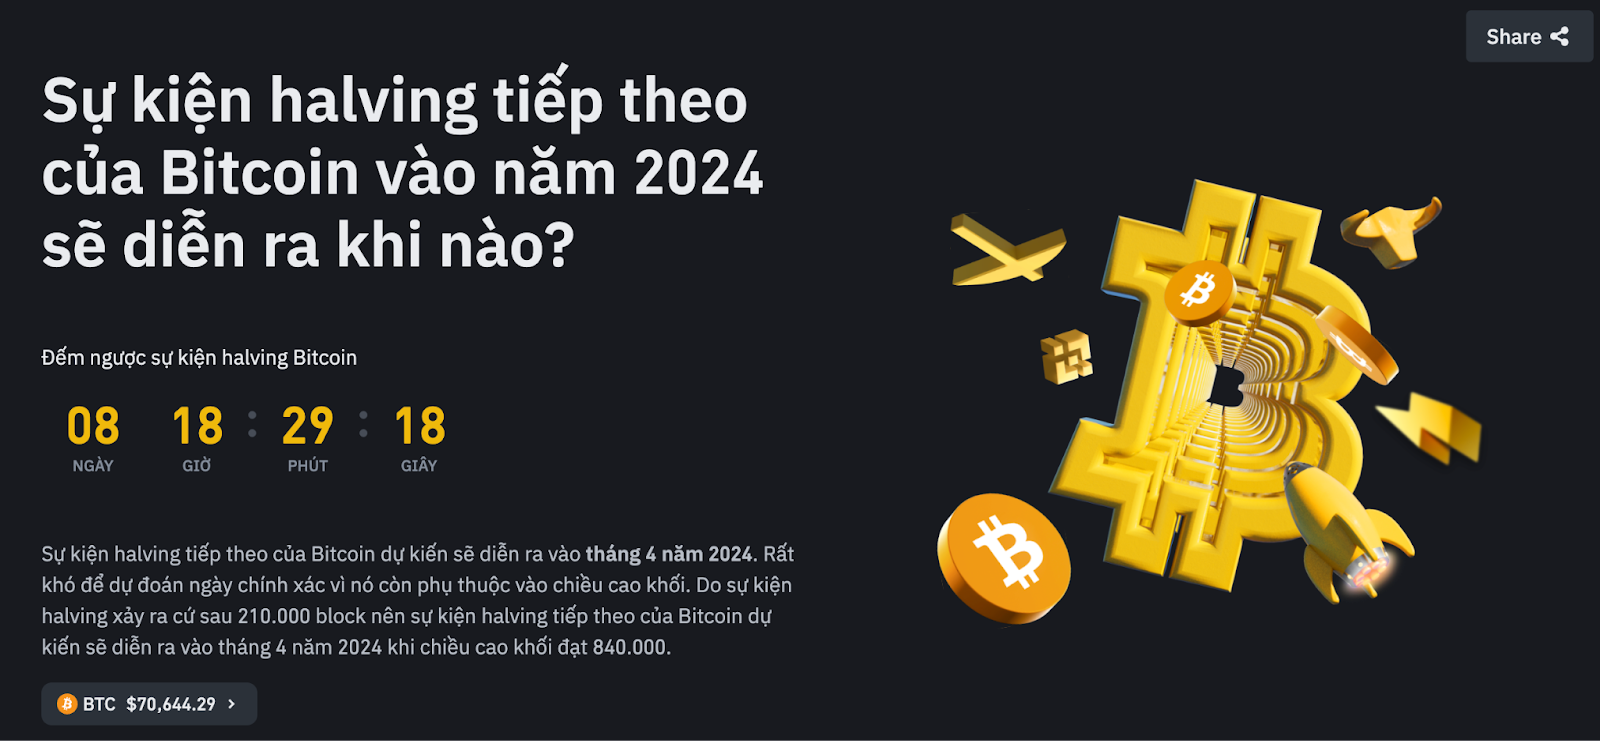 <a href="https://www.binance.com/vi/events/bitcoin-halving">Bitcoin Halving: When Is the Next One? | Binance</a>